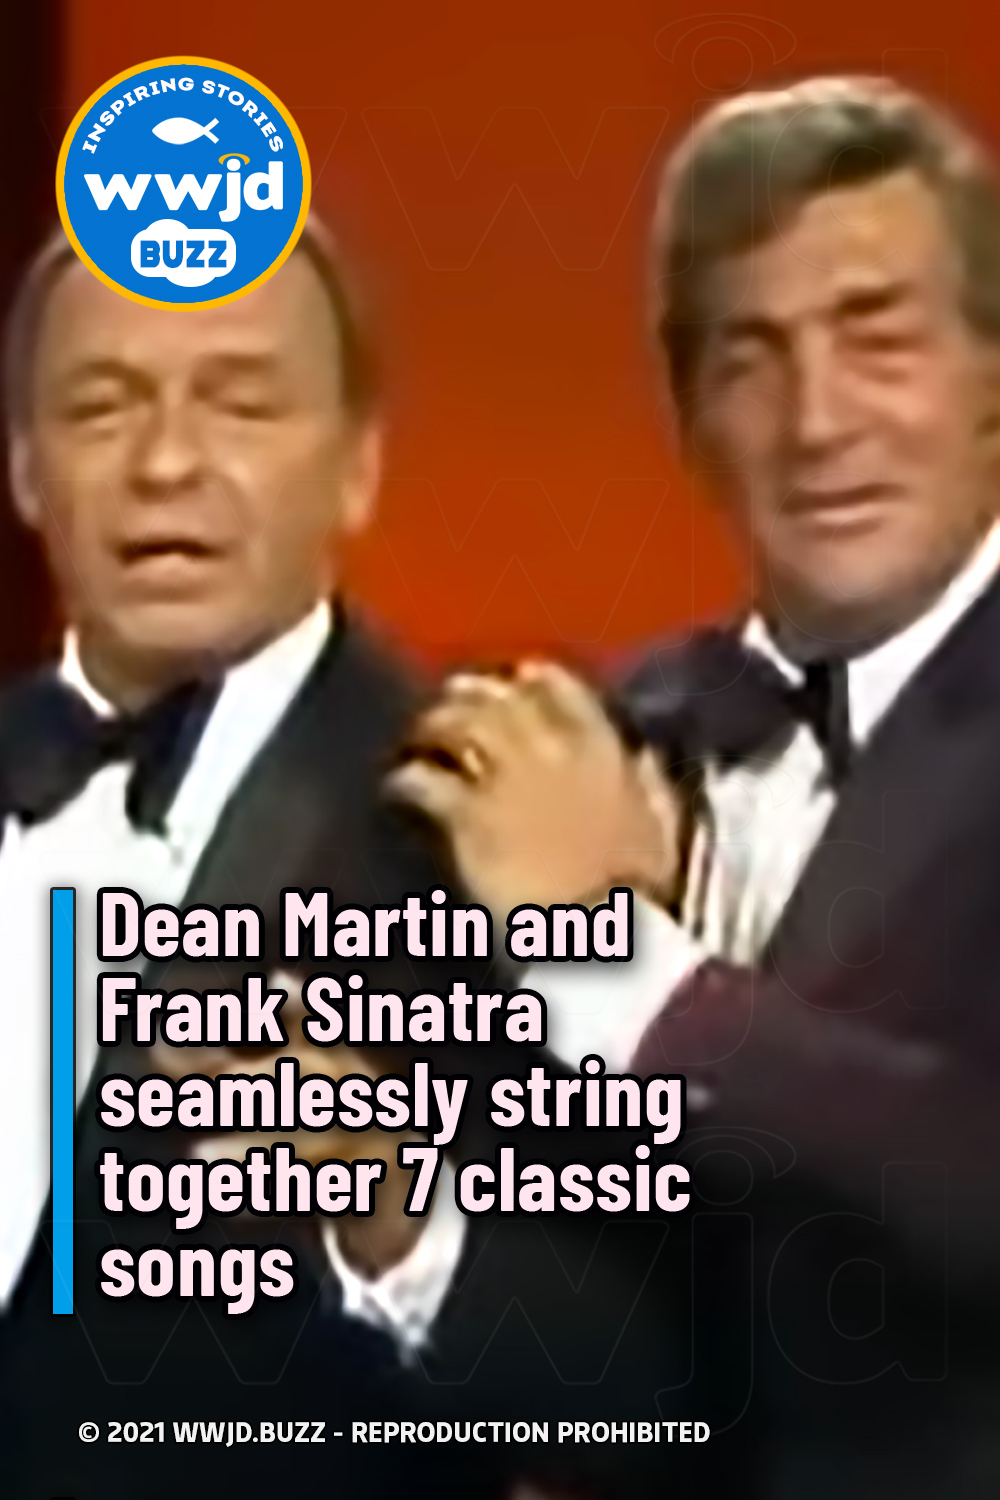 Dean Martin and Frank Sinatra seamlessly string together 7 classic songs